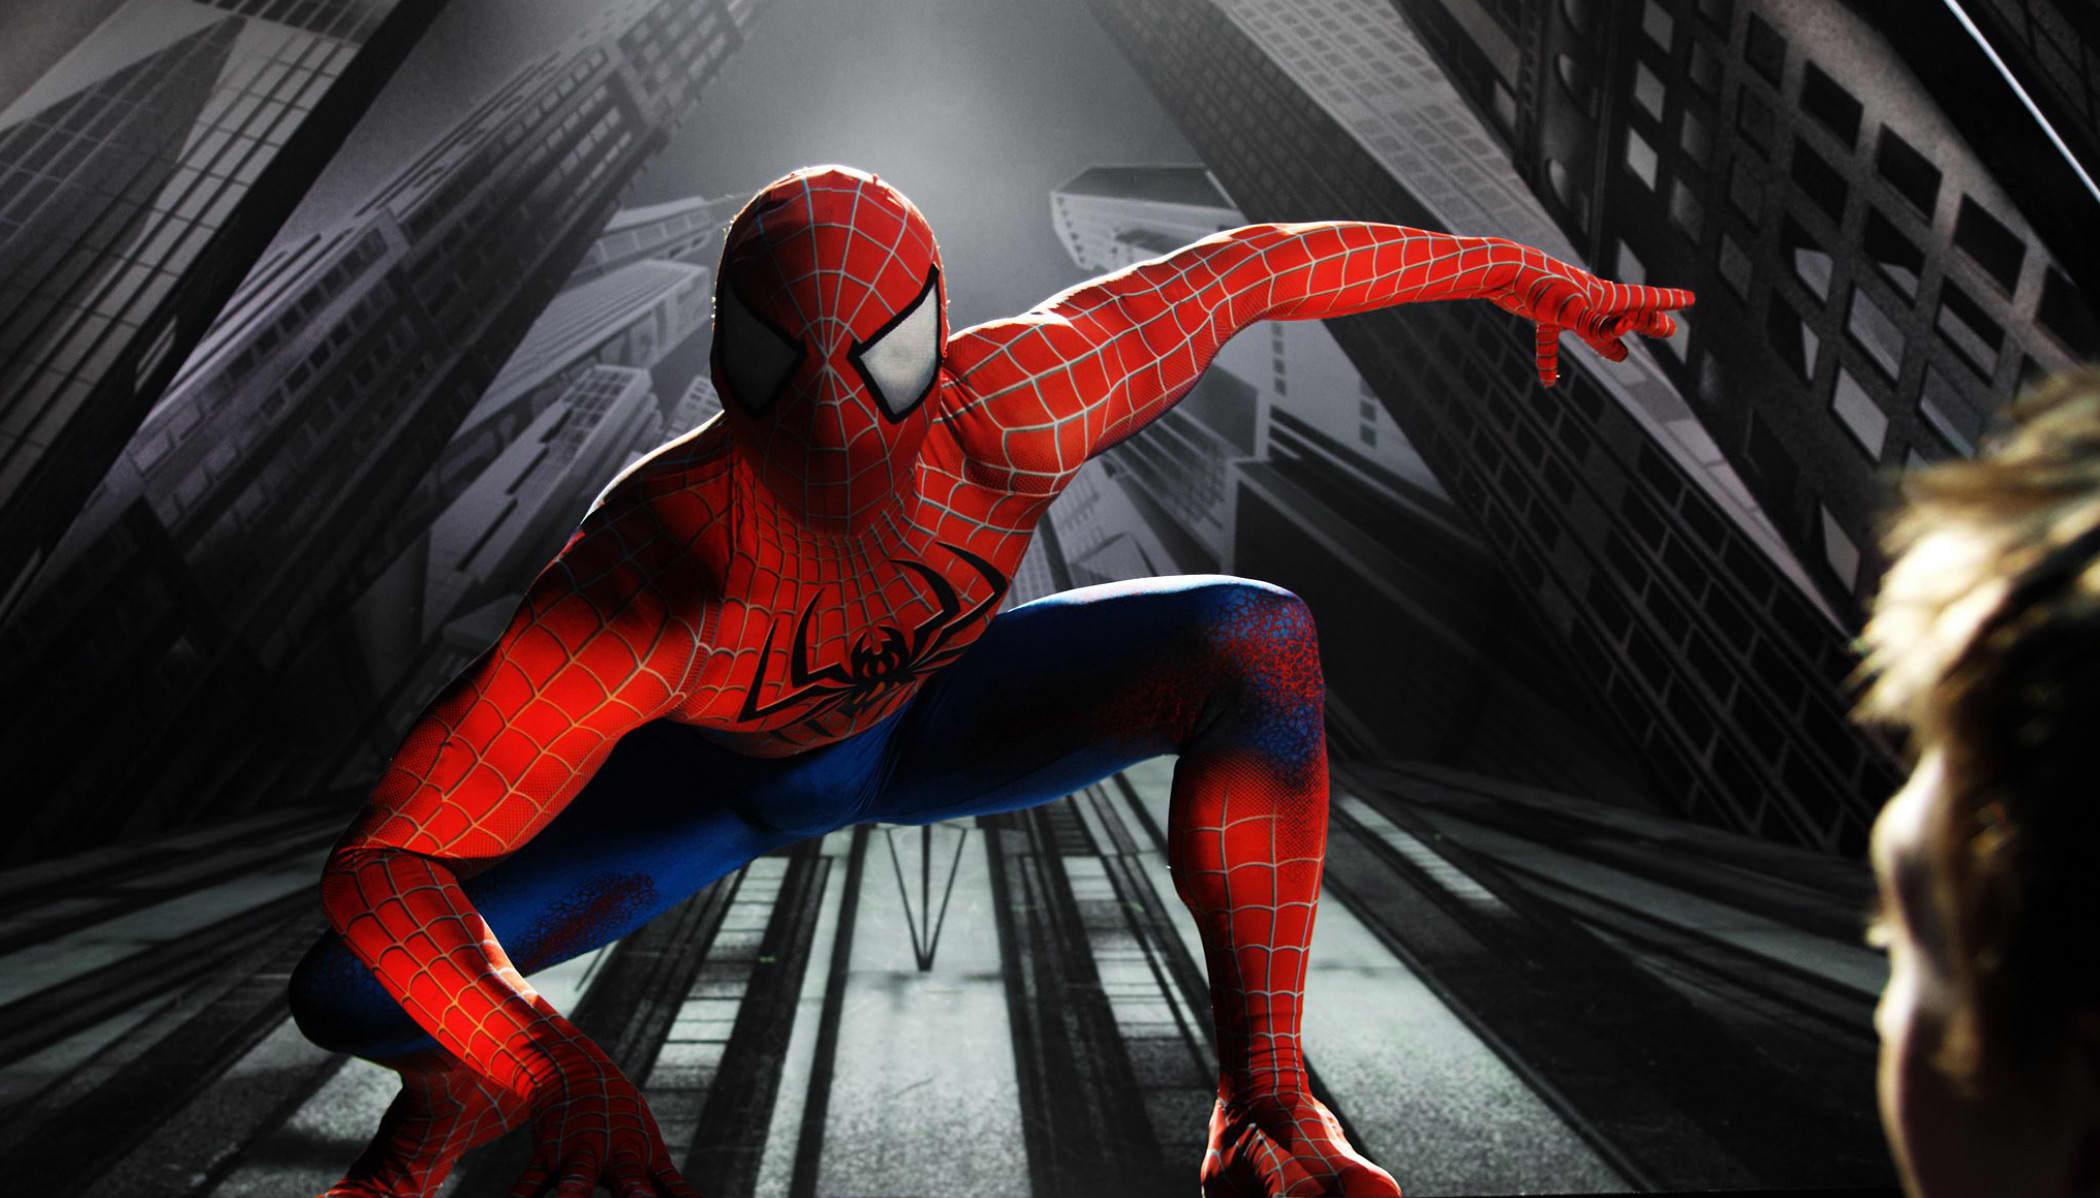 AMC, Sony offering NFTs to people who purchase advance Spider-Man tickets